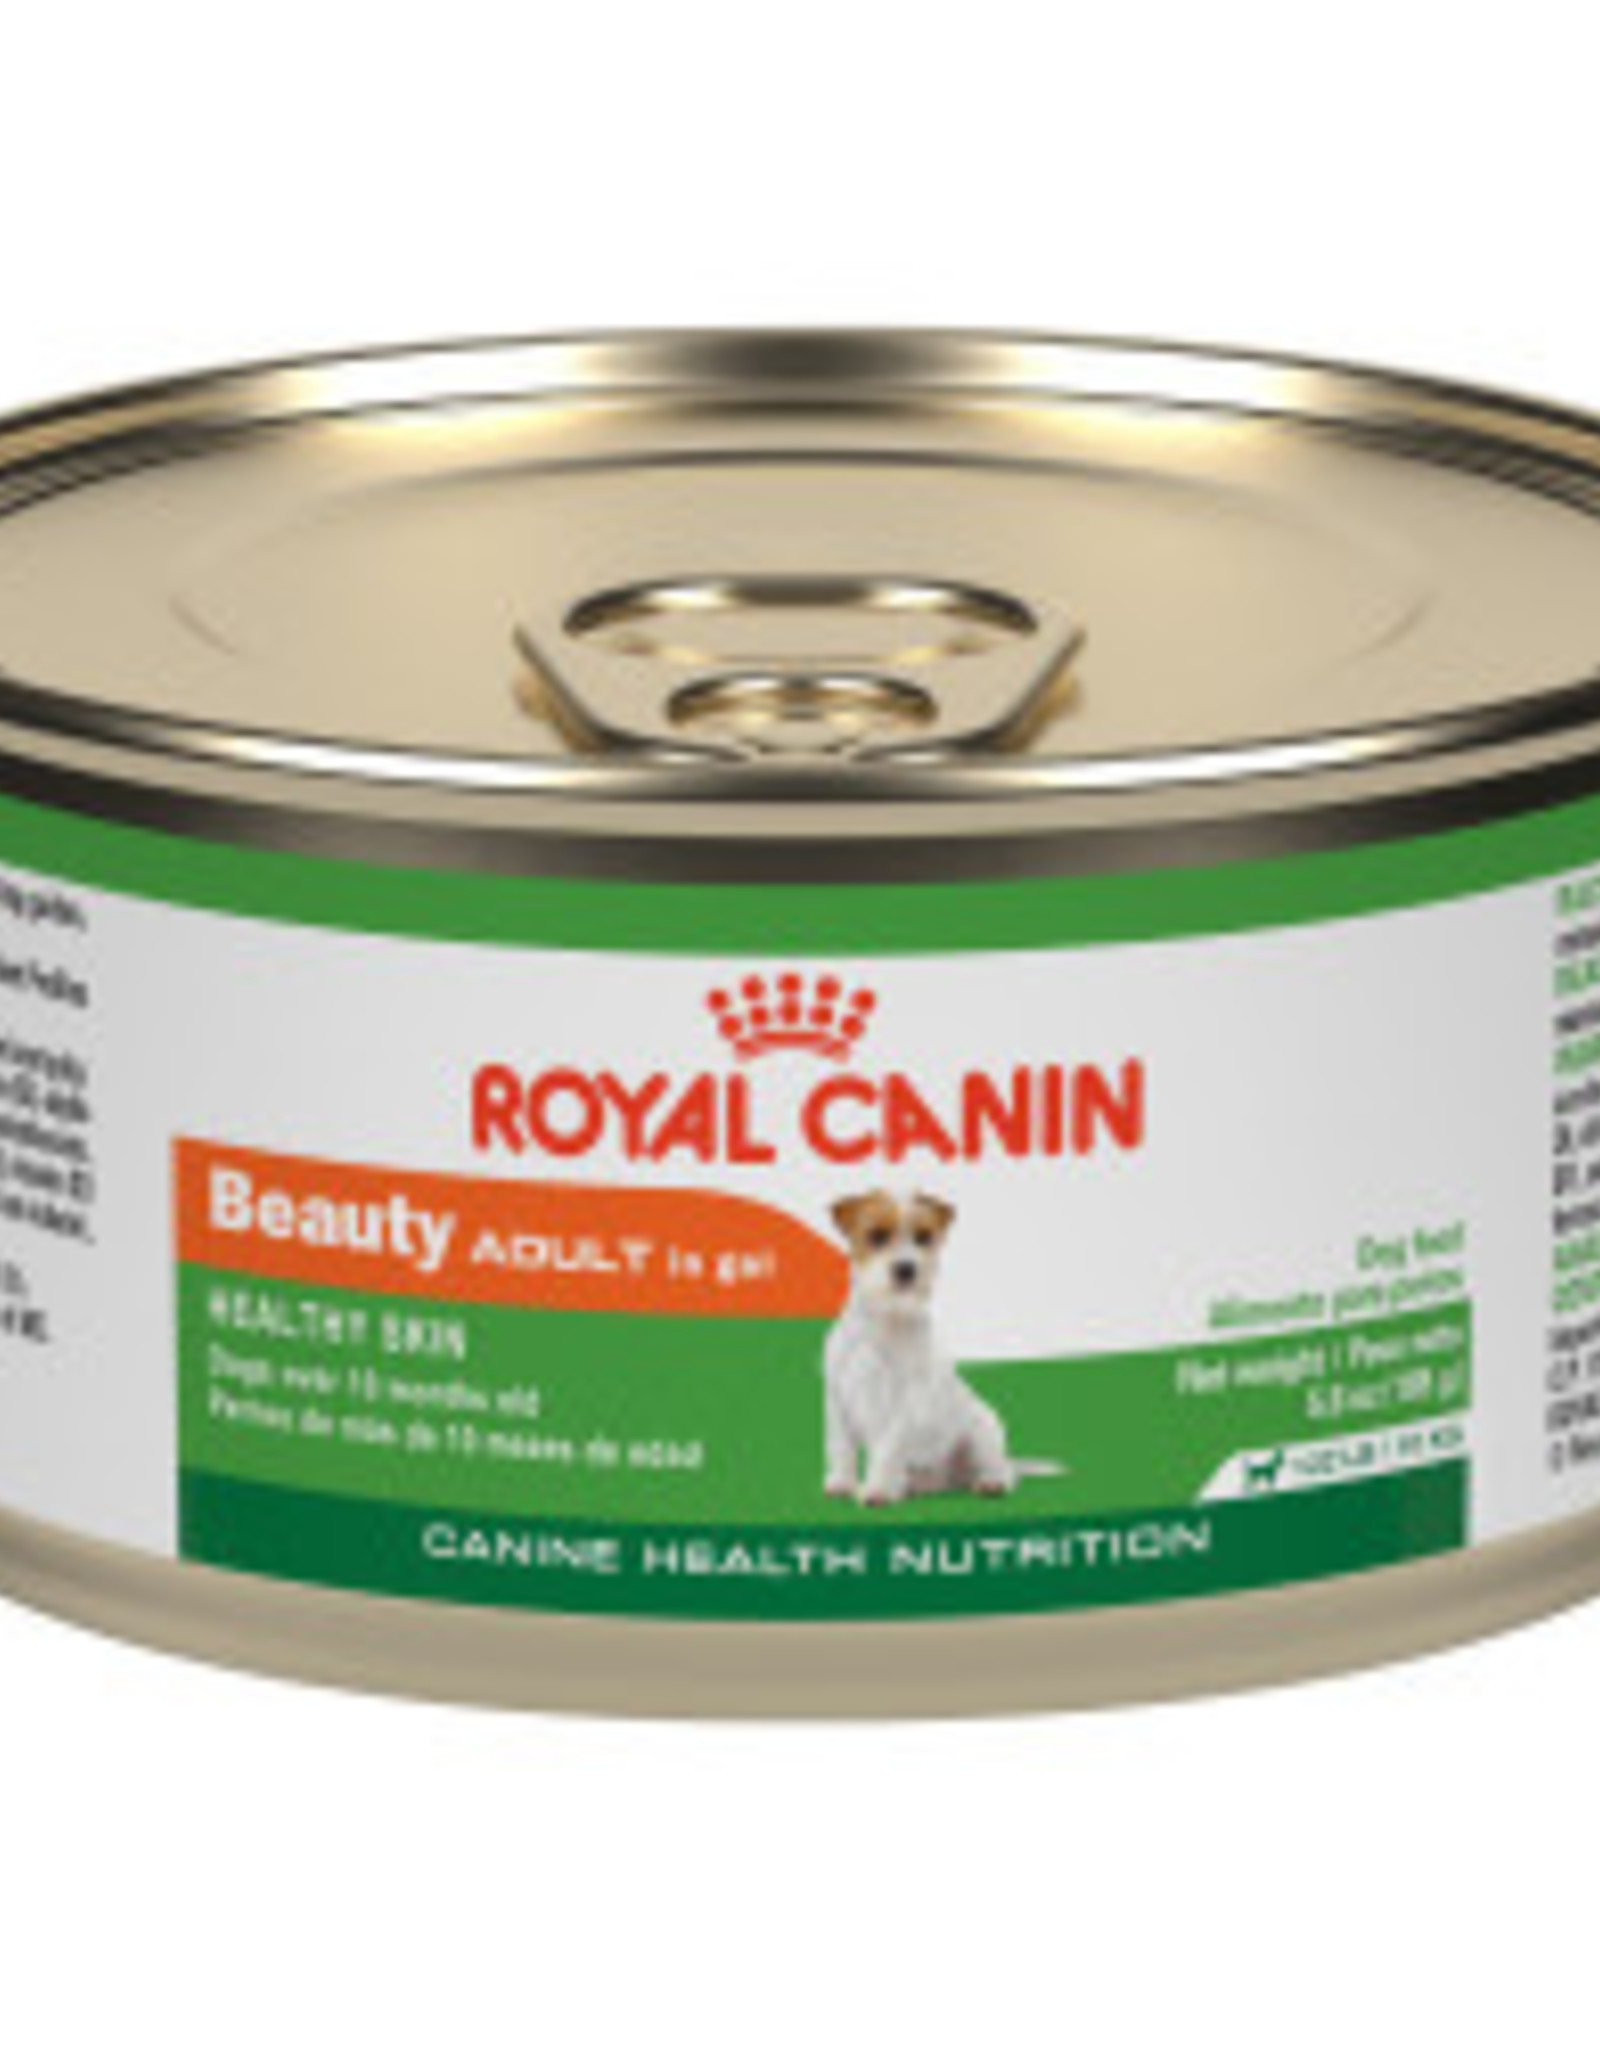 ROYAL CANIN ROYAL CANIN DOG CAN ADULT BEAUTY 5.2OZ CASE OF 24 PAUSED